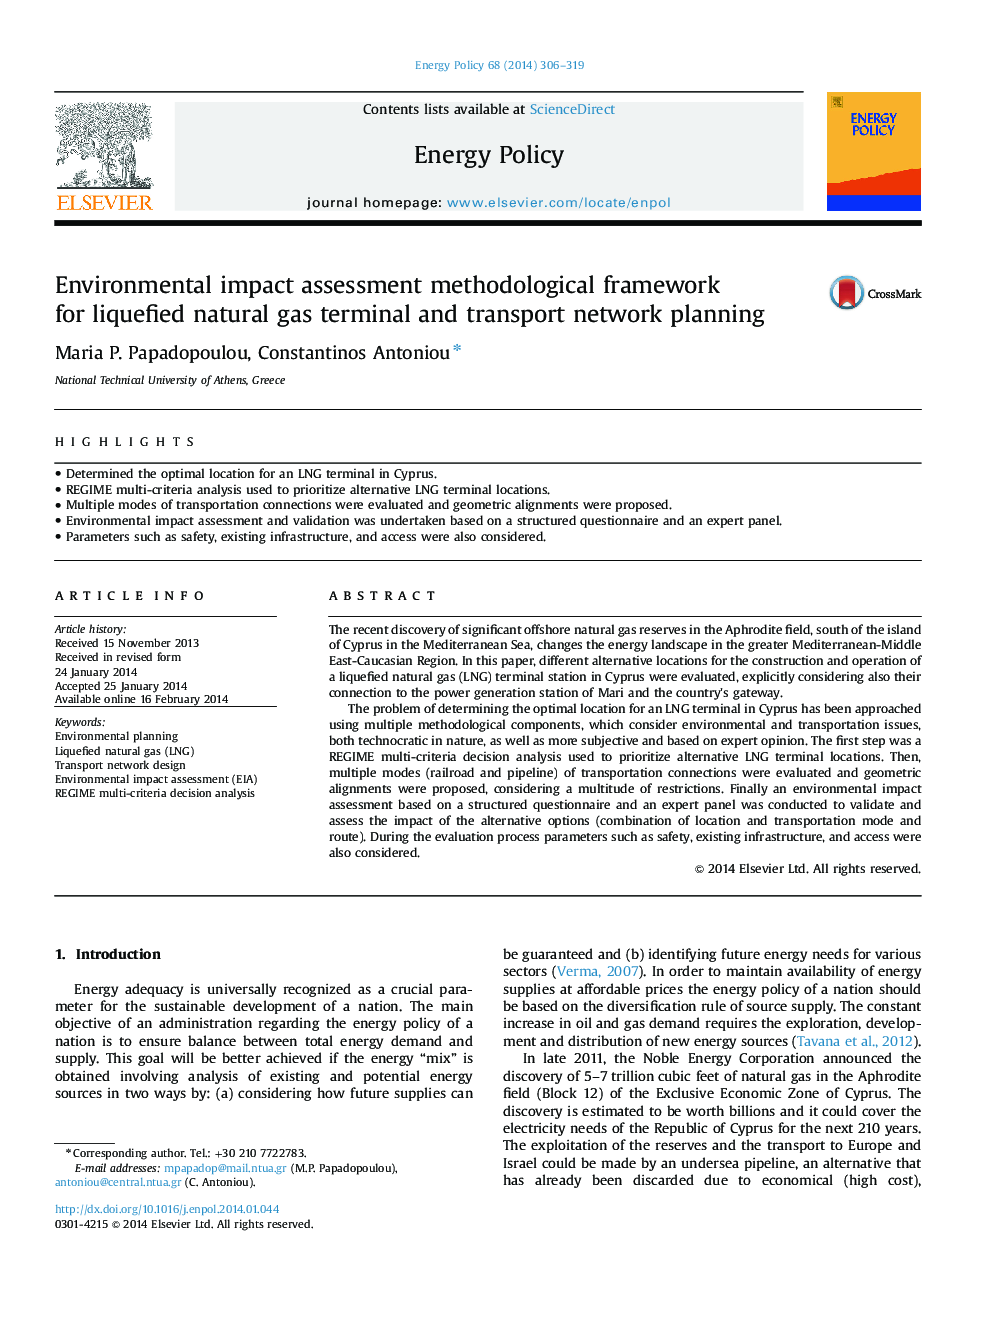 Environmental impact assessment methodological framework for liquefied natural gas terminal and transport network planning